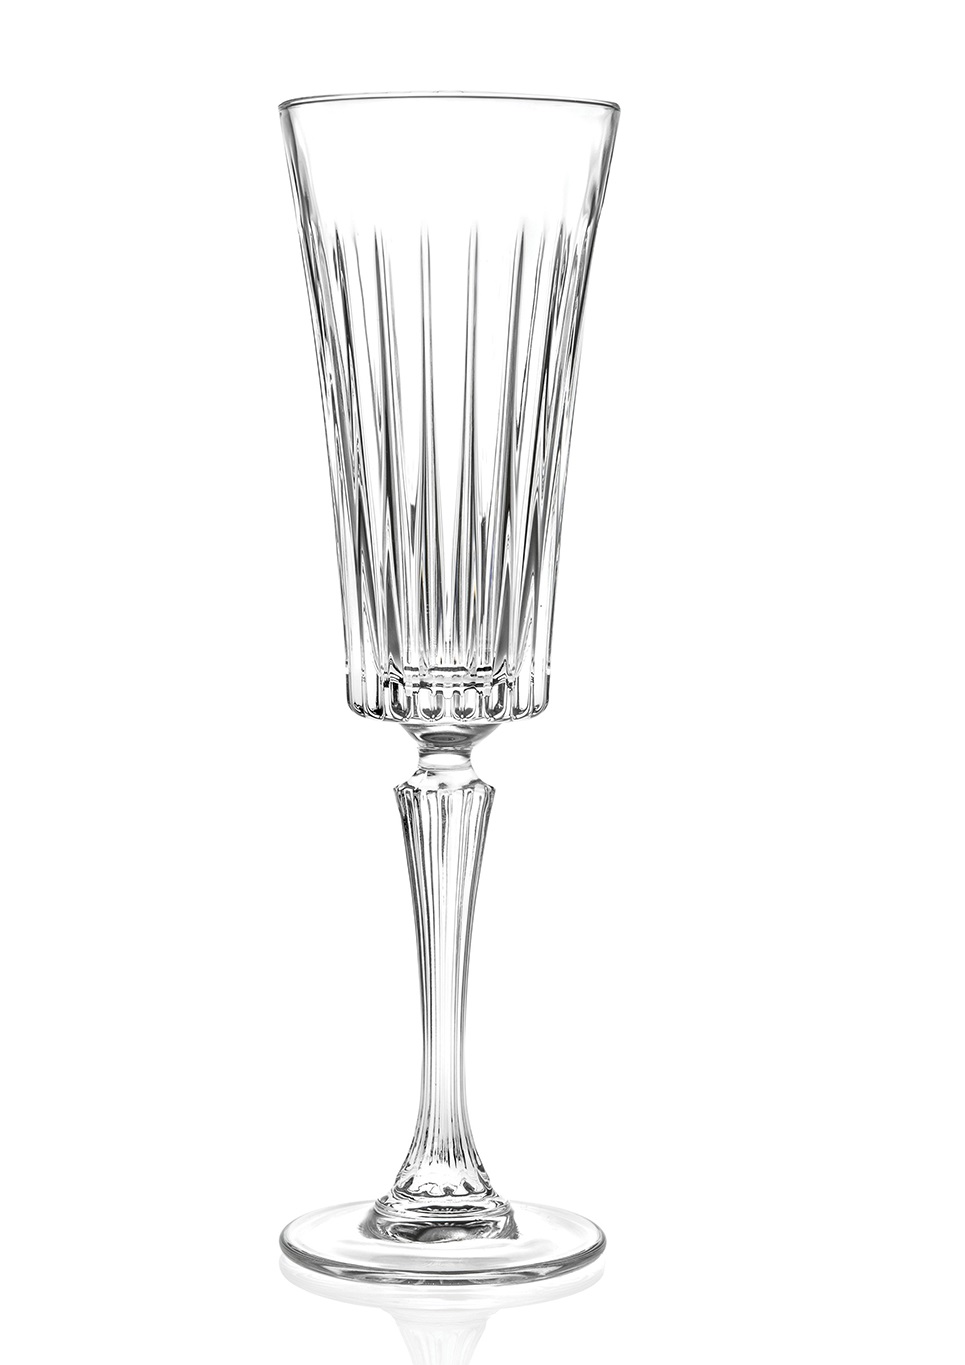 TIMELESS Sherry Goblet LUXION 21cl PROFESSIONAL ITALY